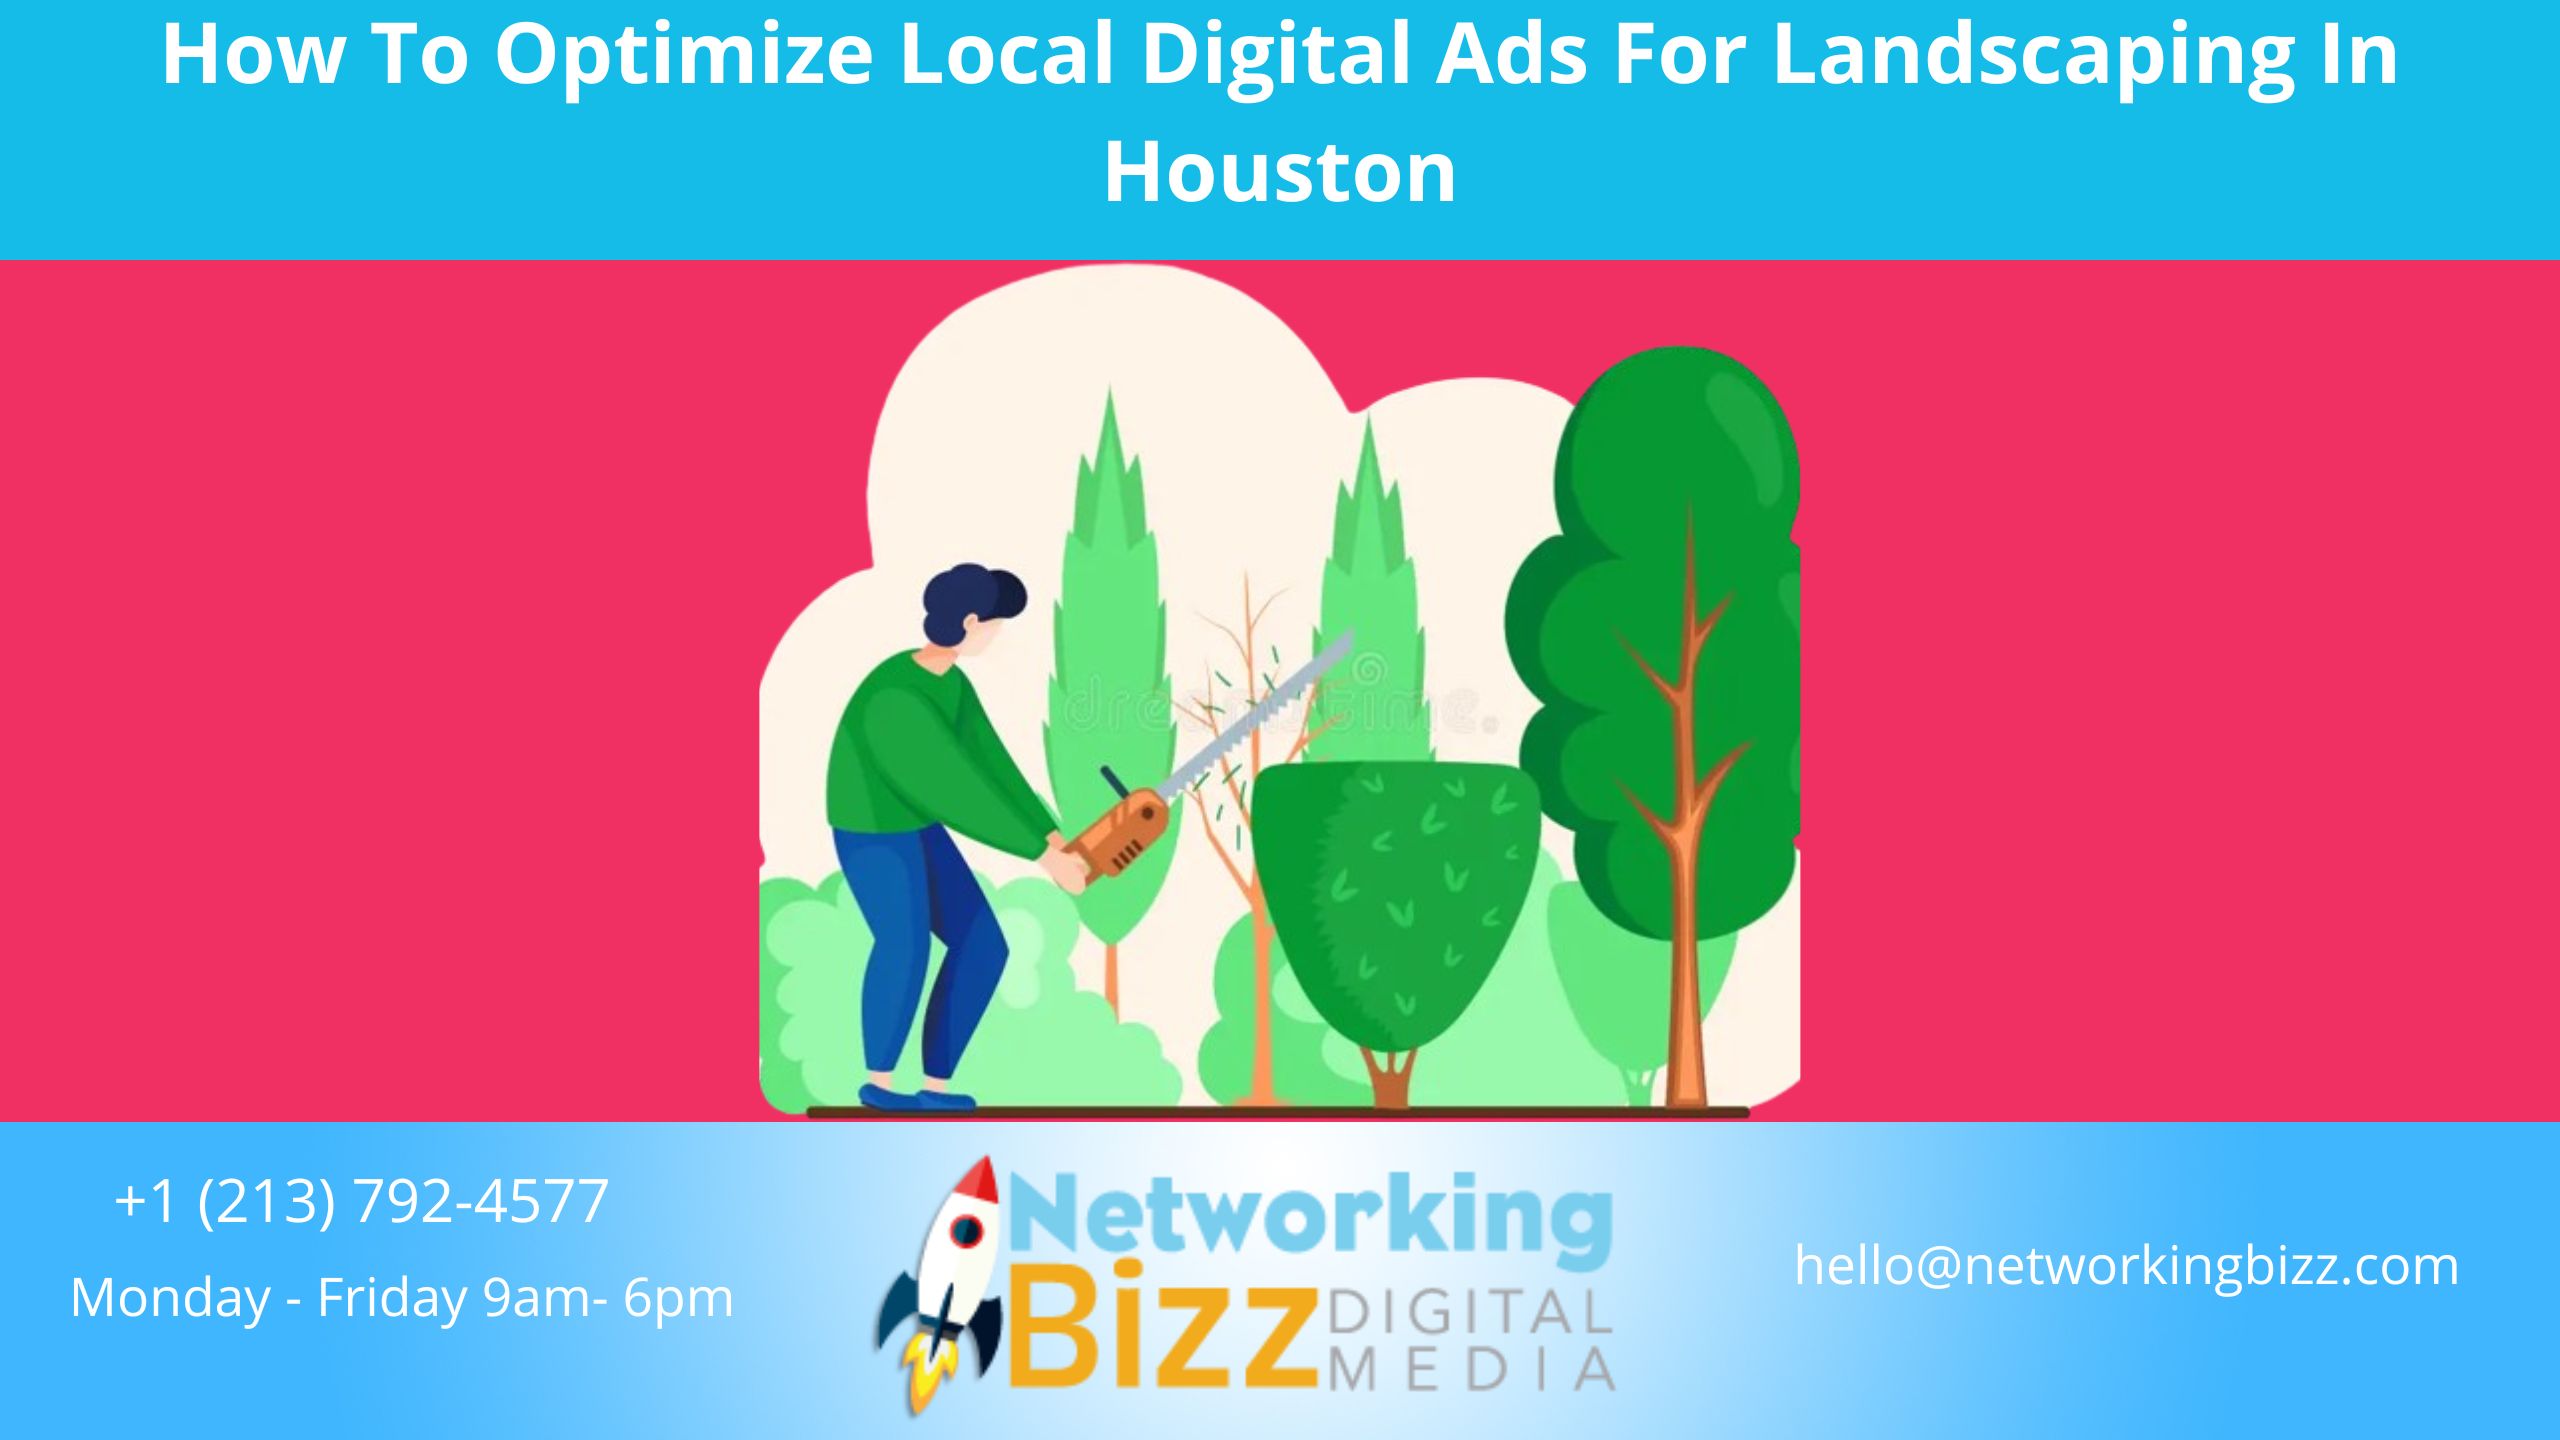 How To Optimize Local Digital Ads For Landscaping In Houston